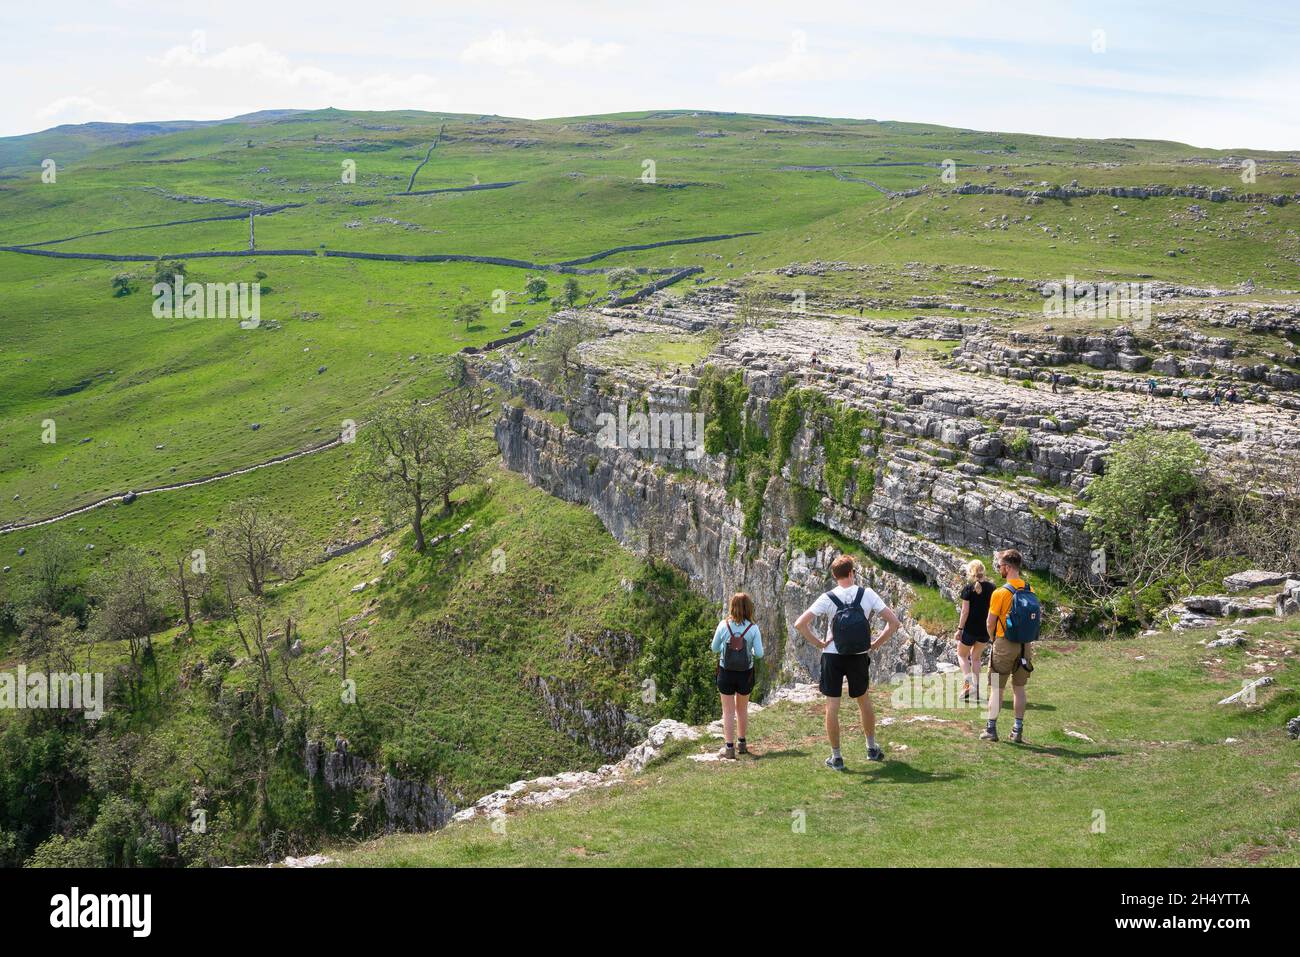 Young people countryside, view in summer of a group of hikers in the Yorkshire Dales pausing to look at Malham Cove in North Yorkshire, UK Stock Photo